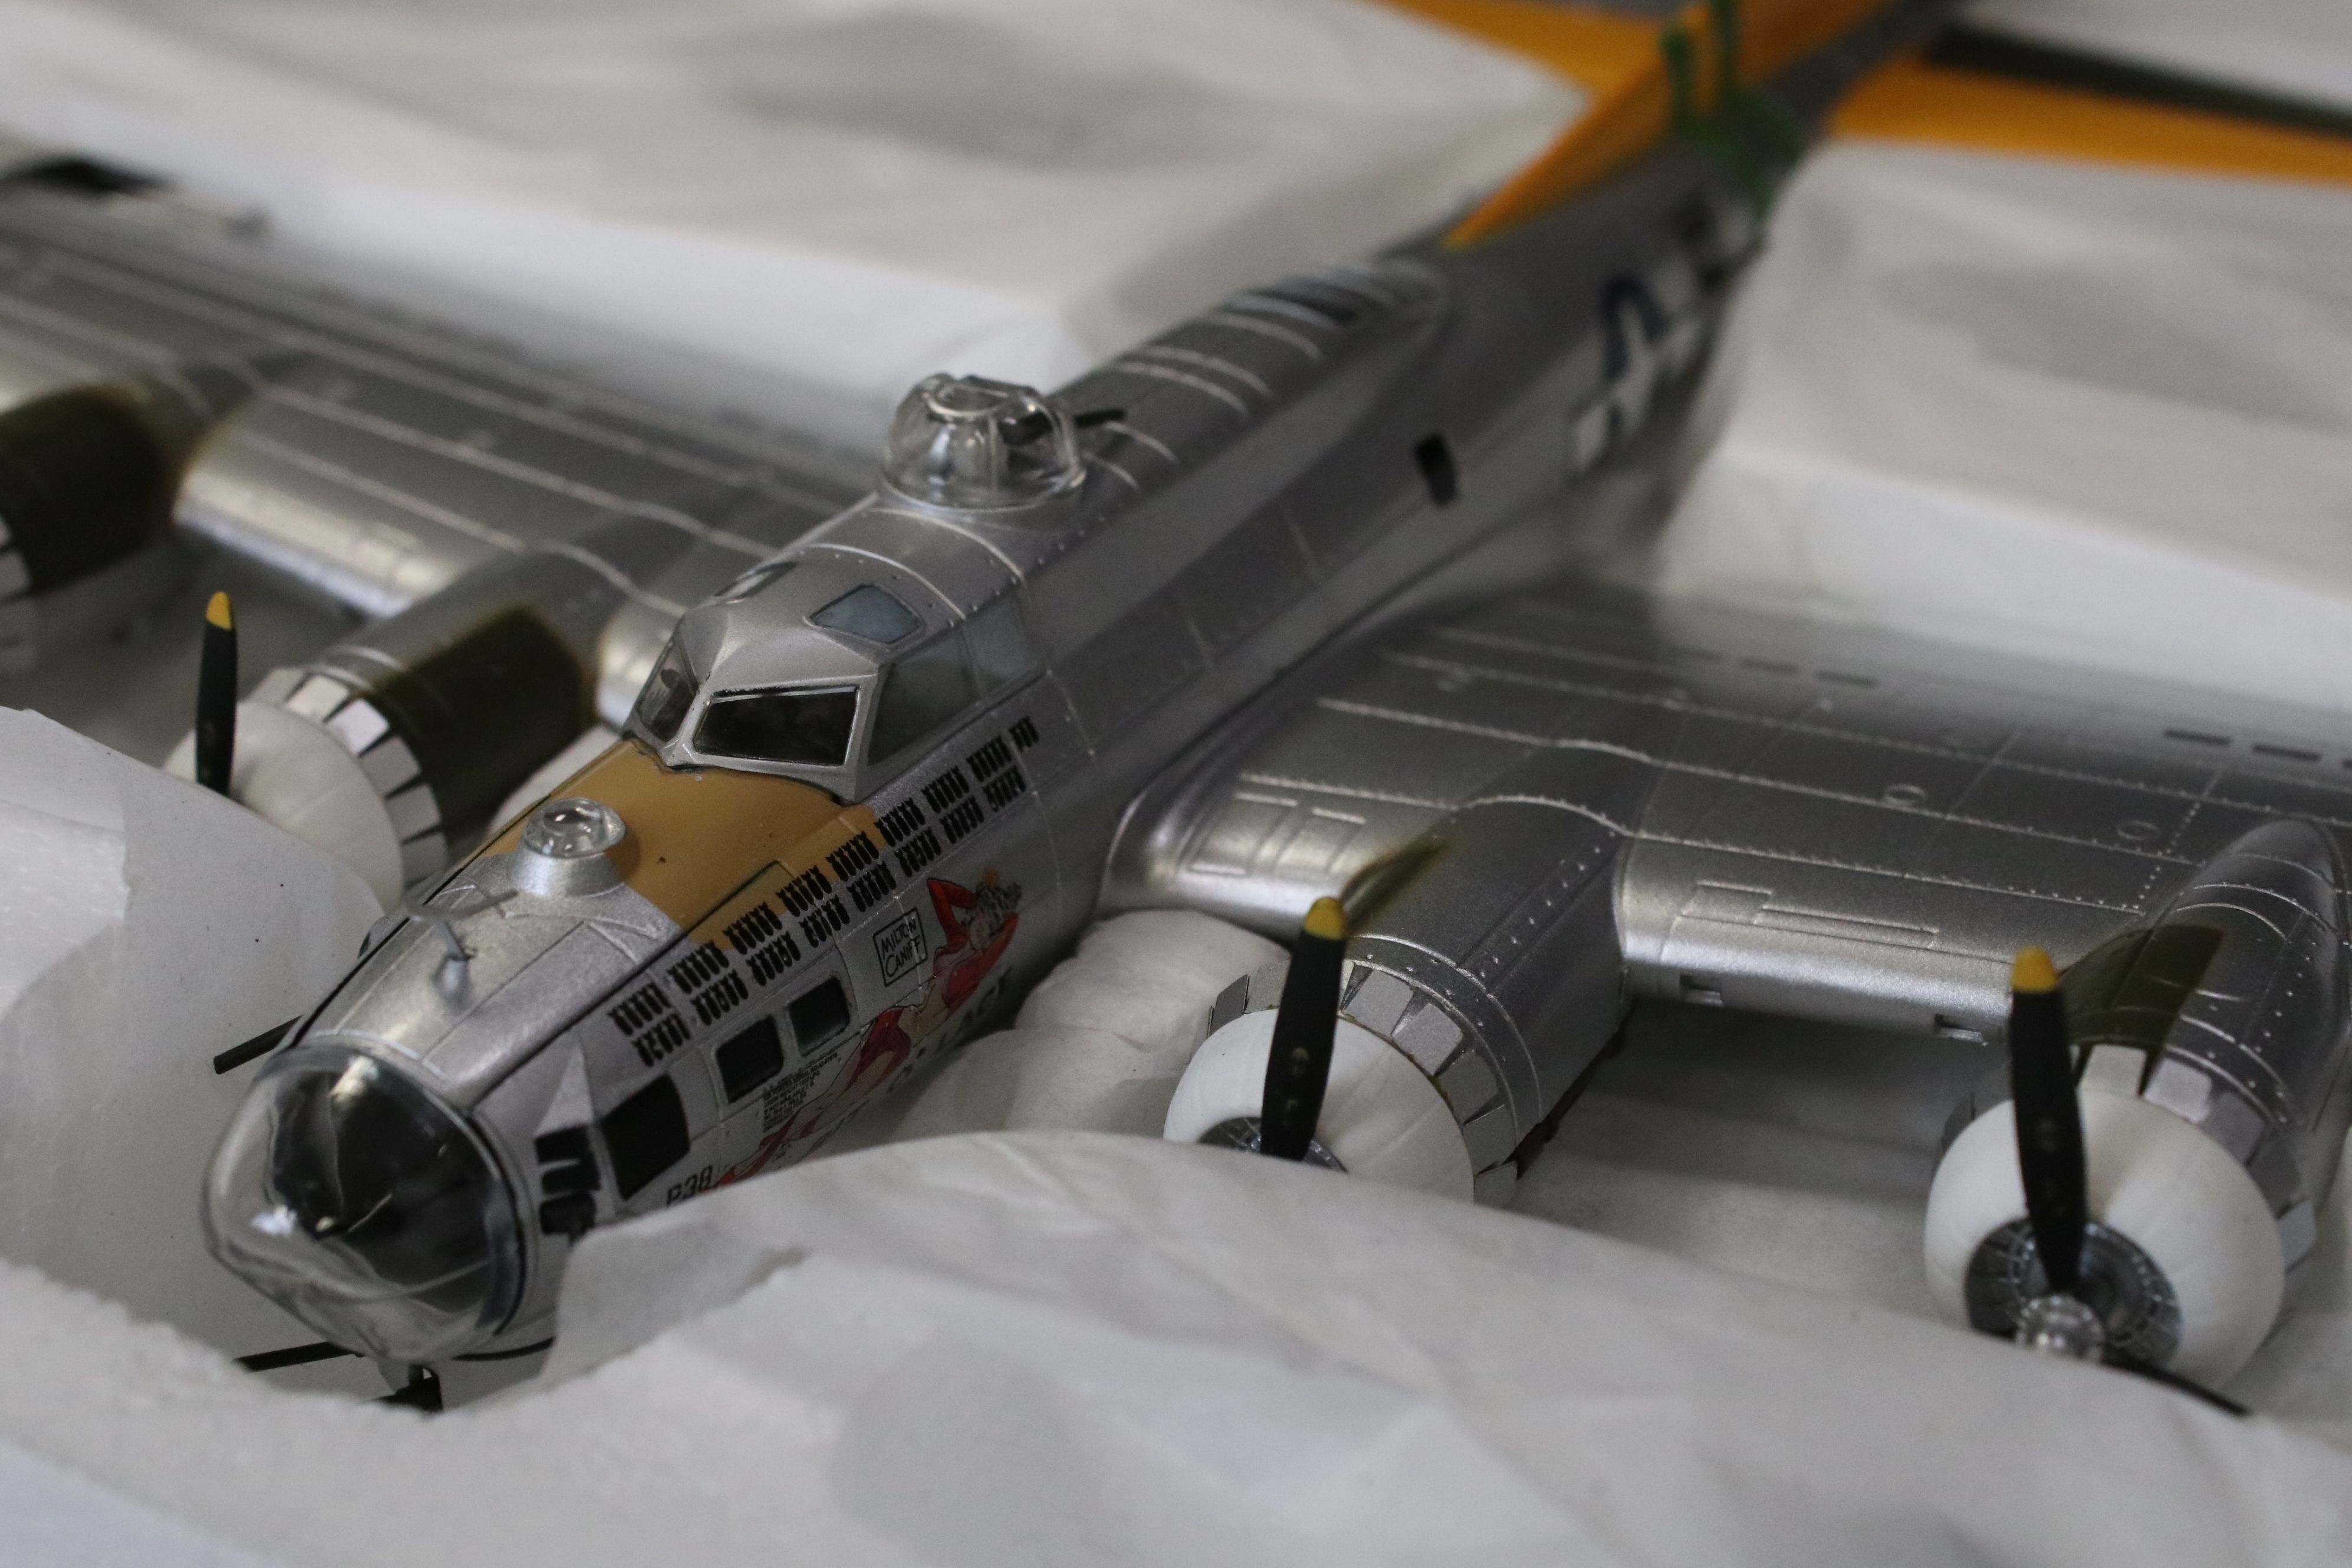 Two Boxed AF1 Air Force 1 1:72 Boeing B-17G Flying Fortress diecast model planes (one model with a - Image 11 of 29